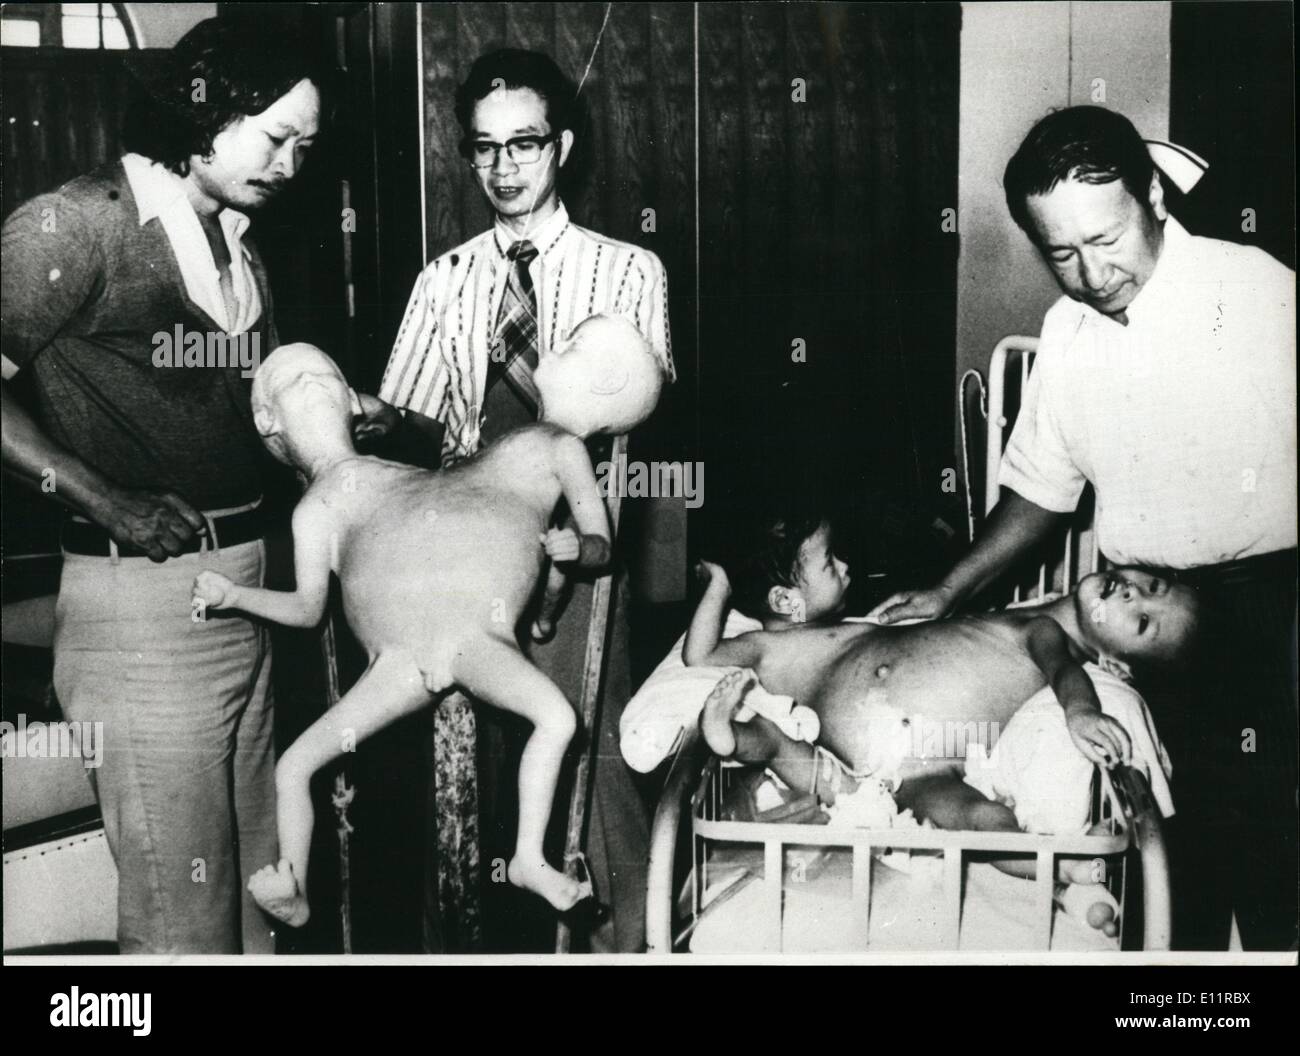 Oct. 10, 1979 - To 32-month old brothers, Chang Chung-Jen and Chang Chung-Yi, conjoined a the abdomen, were separated successfully at the National University Hospital in Taiwan after a 12 hour operation which required the attention of 36 doctors from all over the world. Stock Photo